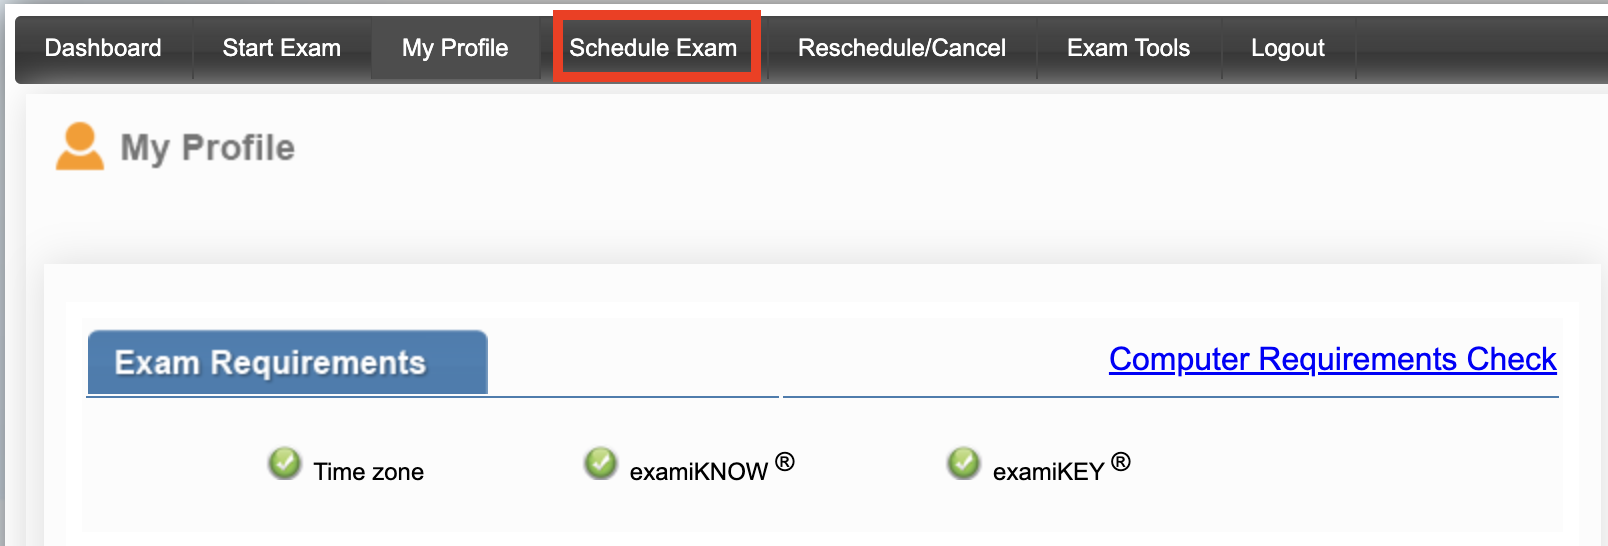 Image of the Exams portal, with the focus on the Schedule Exam tab, featuring the Exam Requirements field.